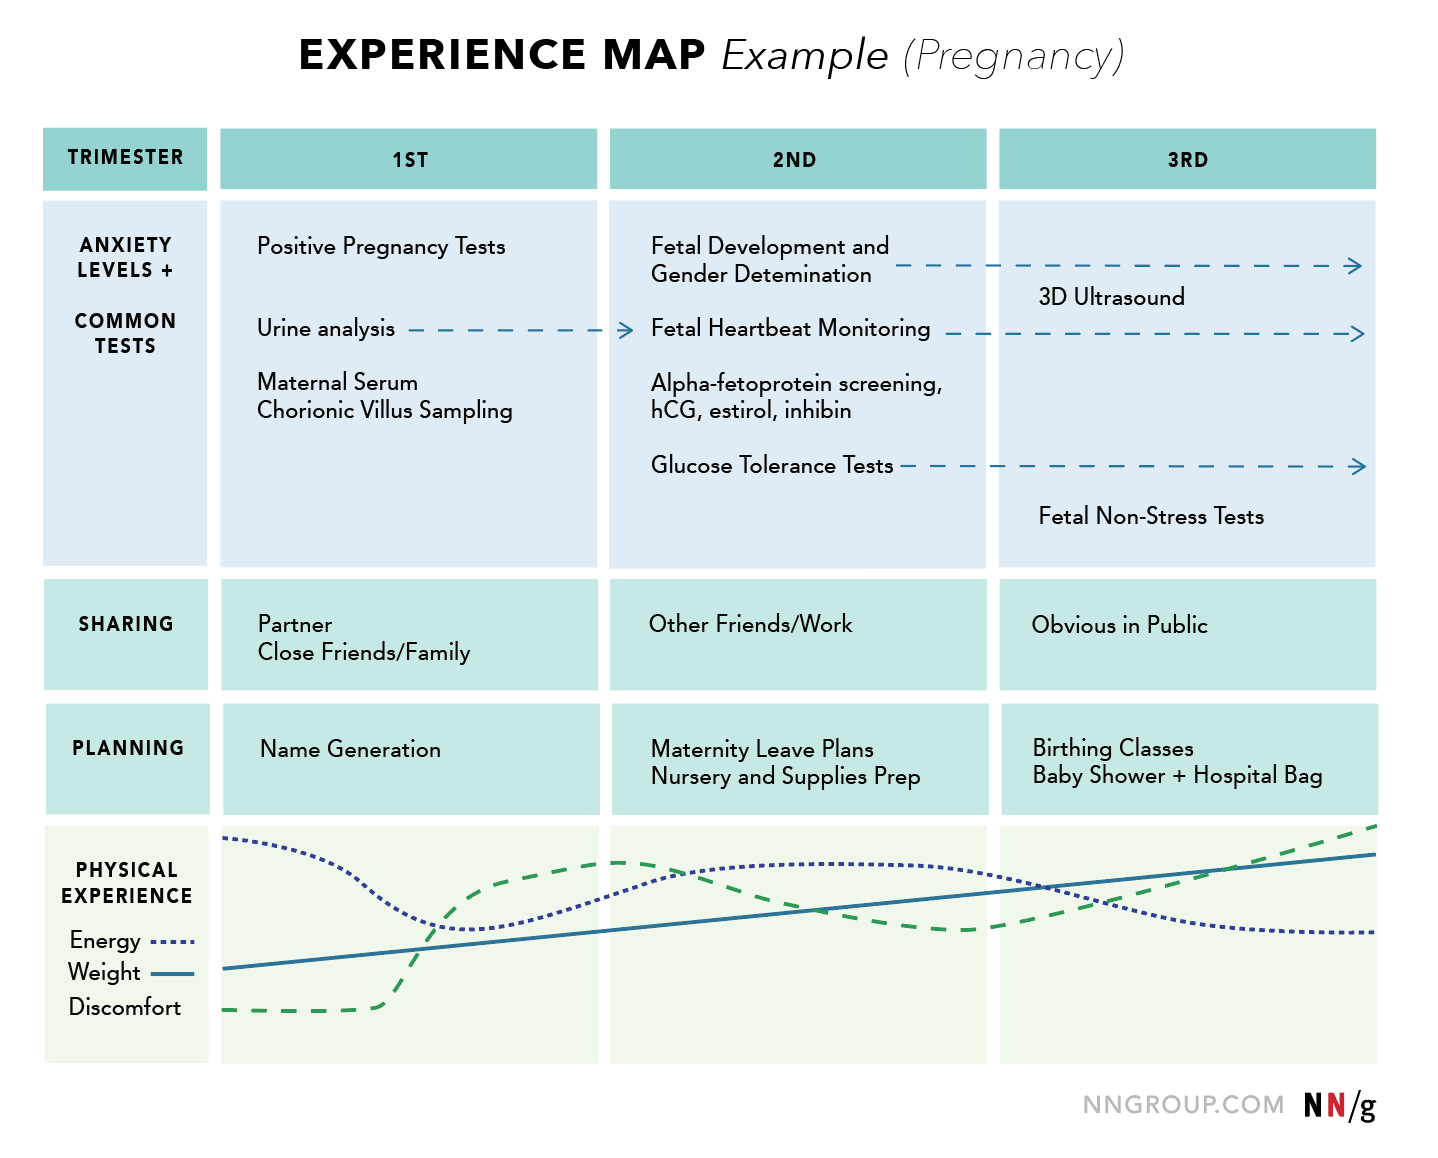 Experience Map UX Mapping Cheat Sheet NN/g